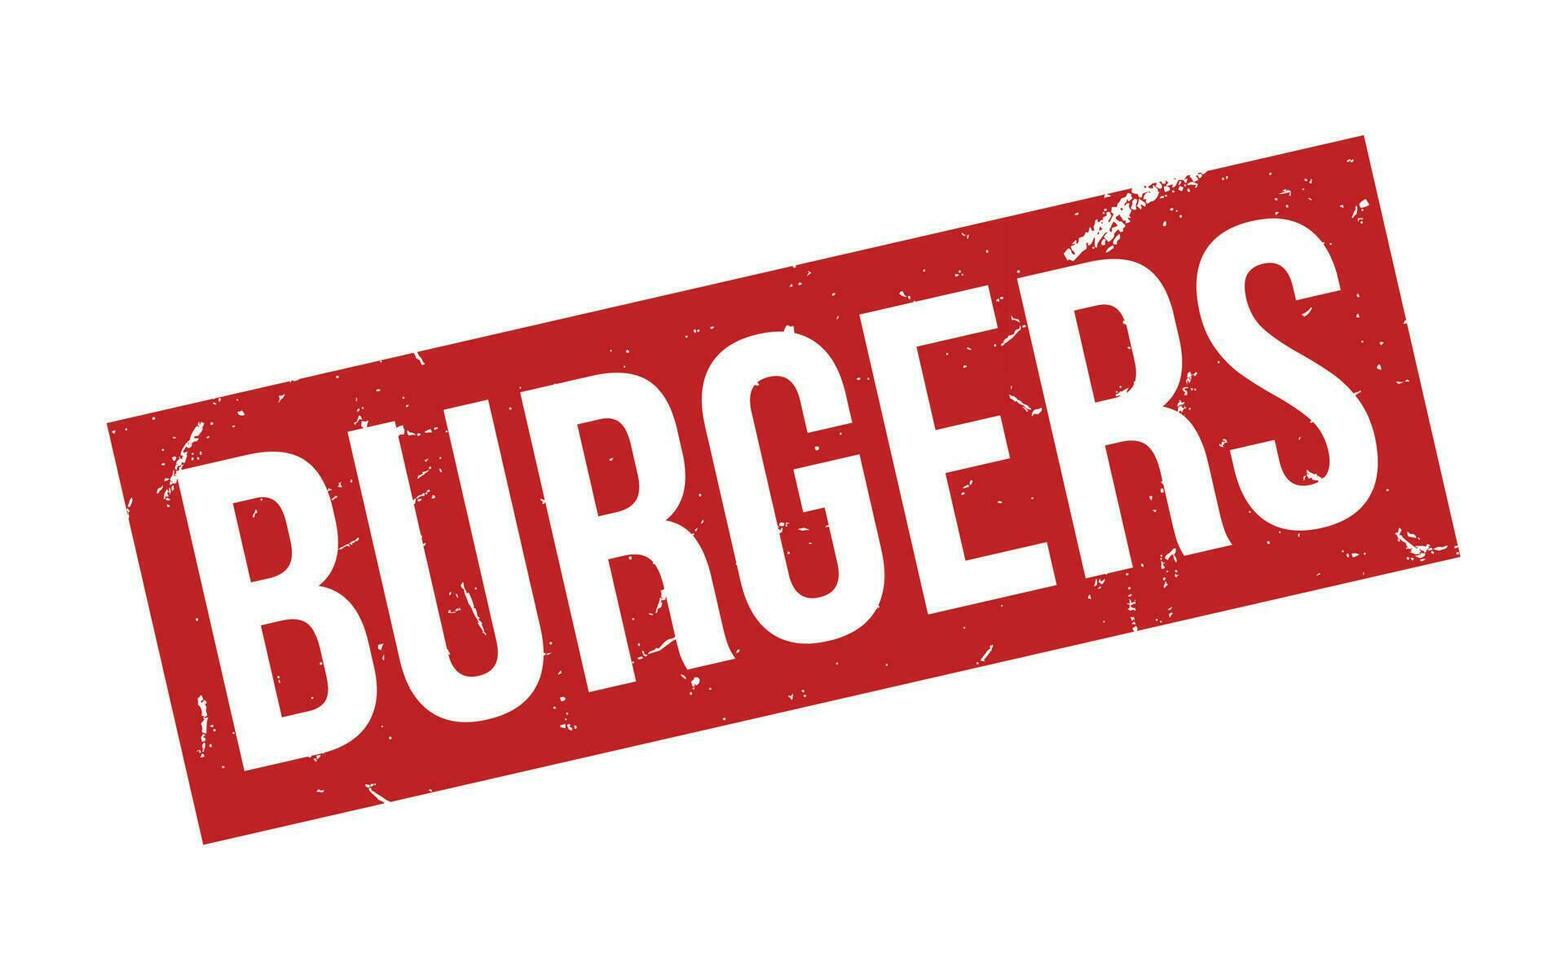 Red Burgers Rubber Stamp Seal Vector